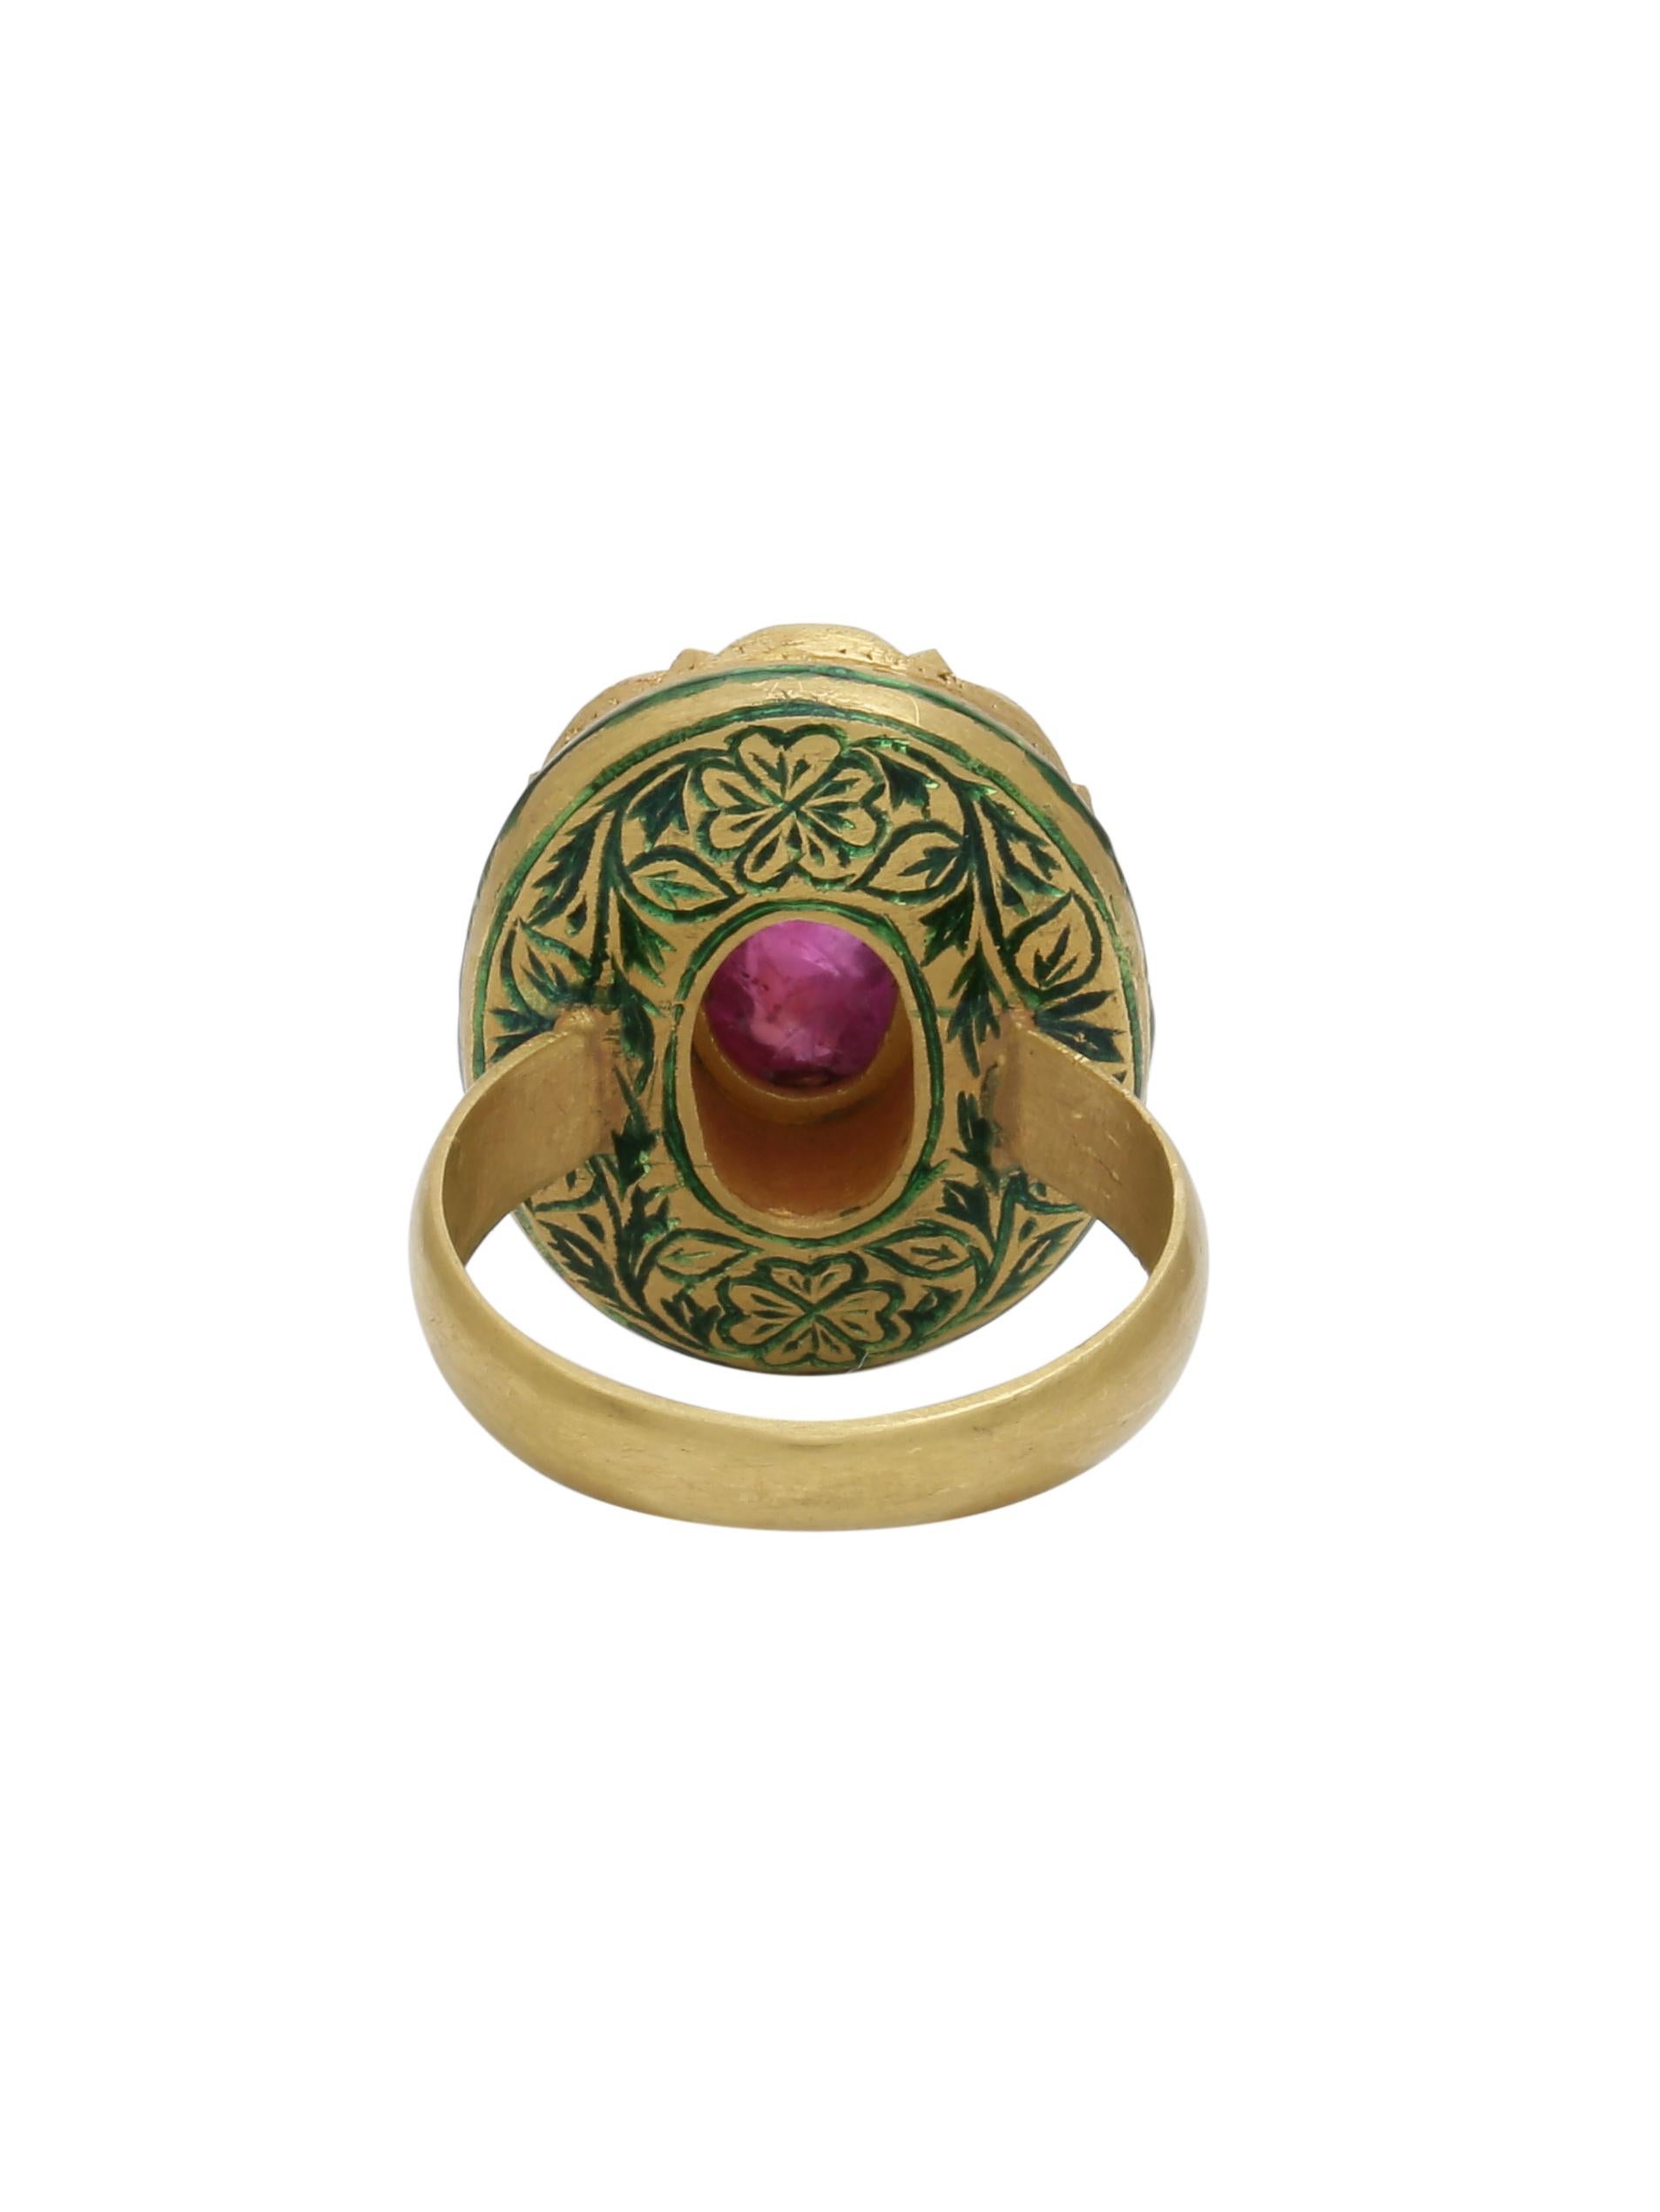 A natural pink Ruby Cabochon set in 22k Gold with uncut diamonds all around making a beautiful cocktail ring. You will also notice intricate enamel work at the back of the ring which is traditional from the region of Jaipur, India. The Ring is all